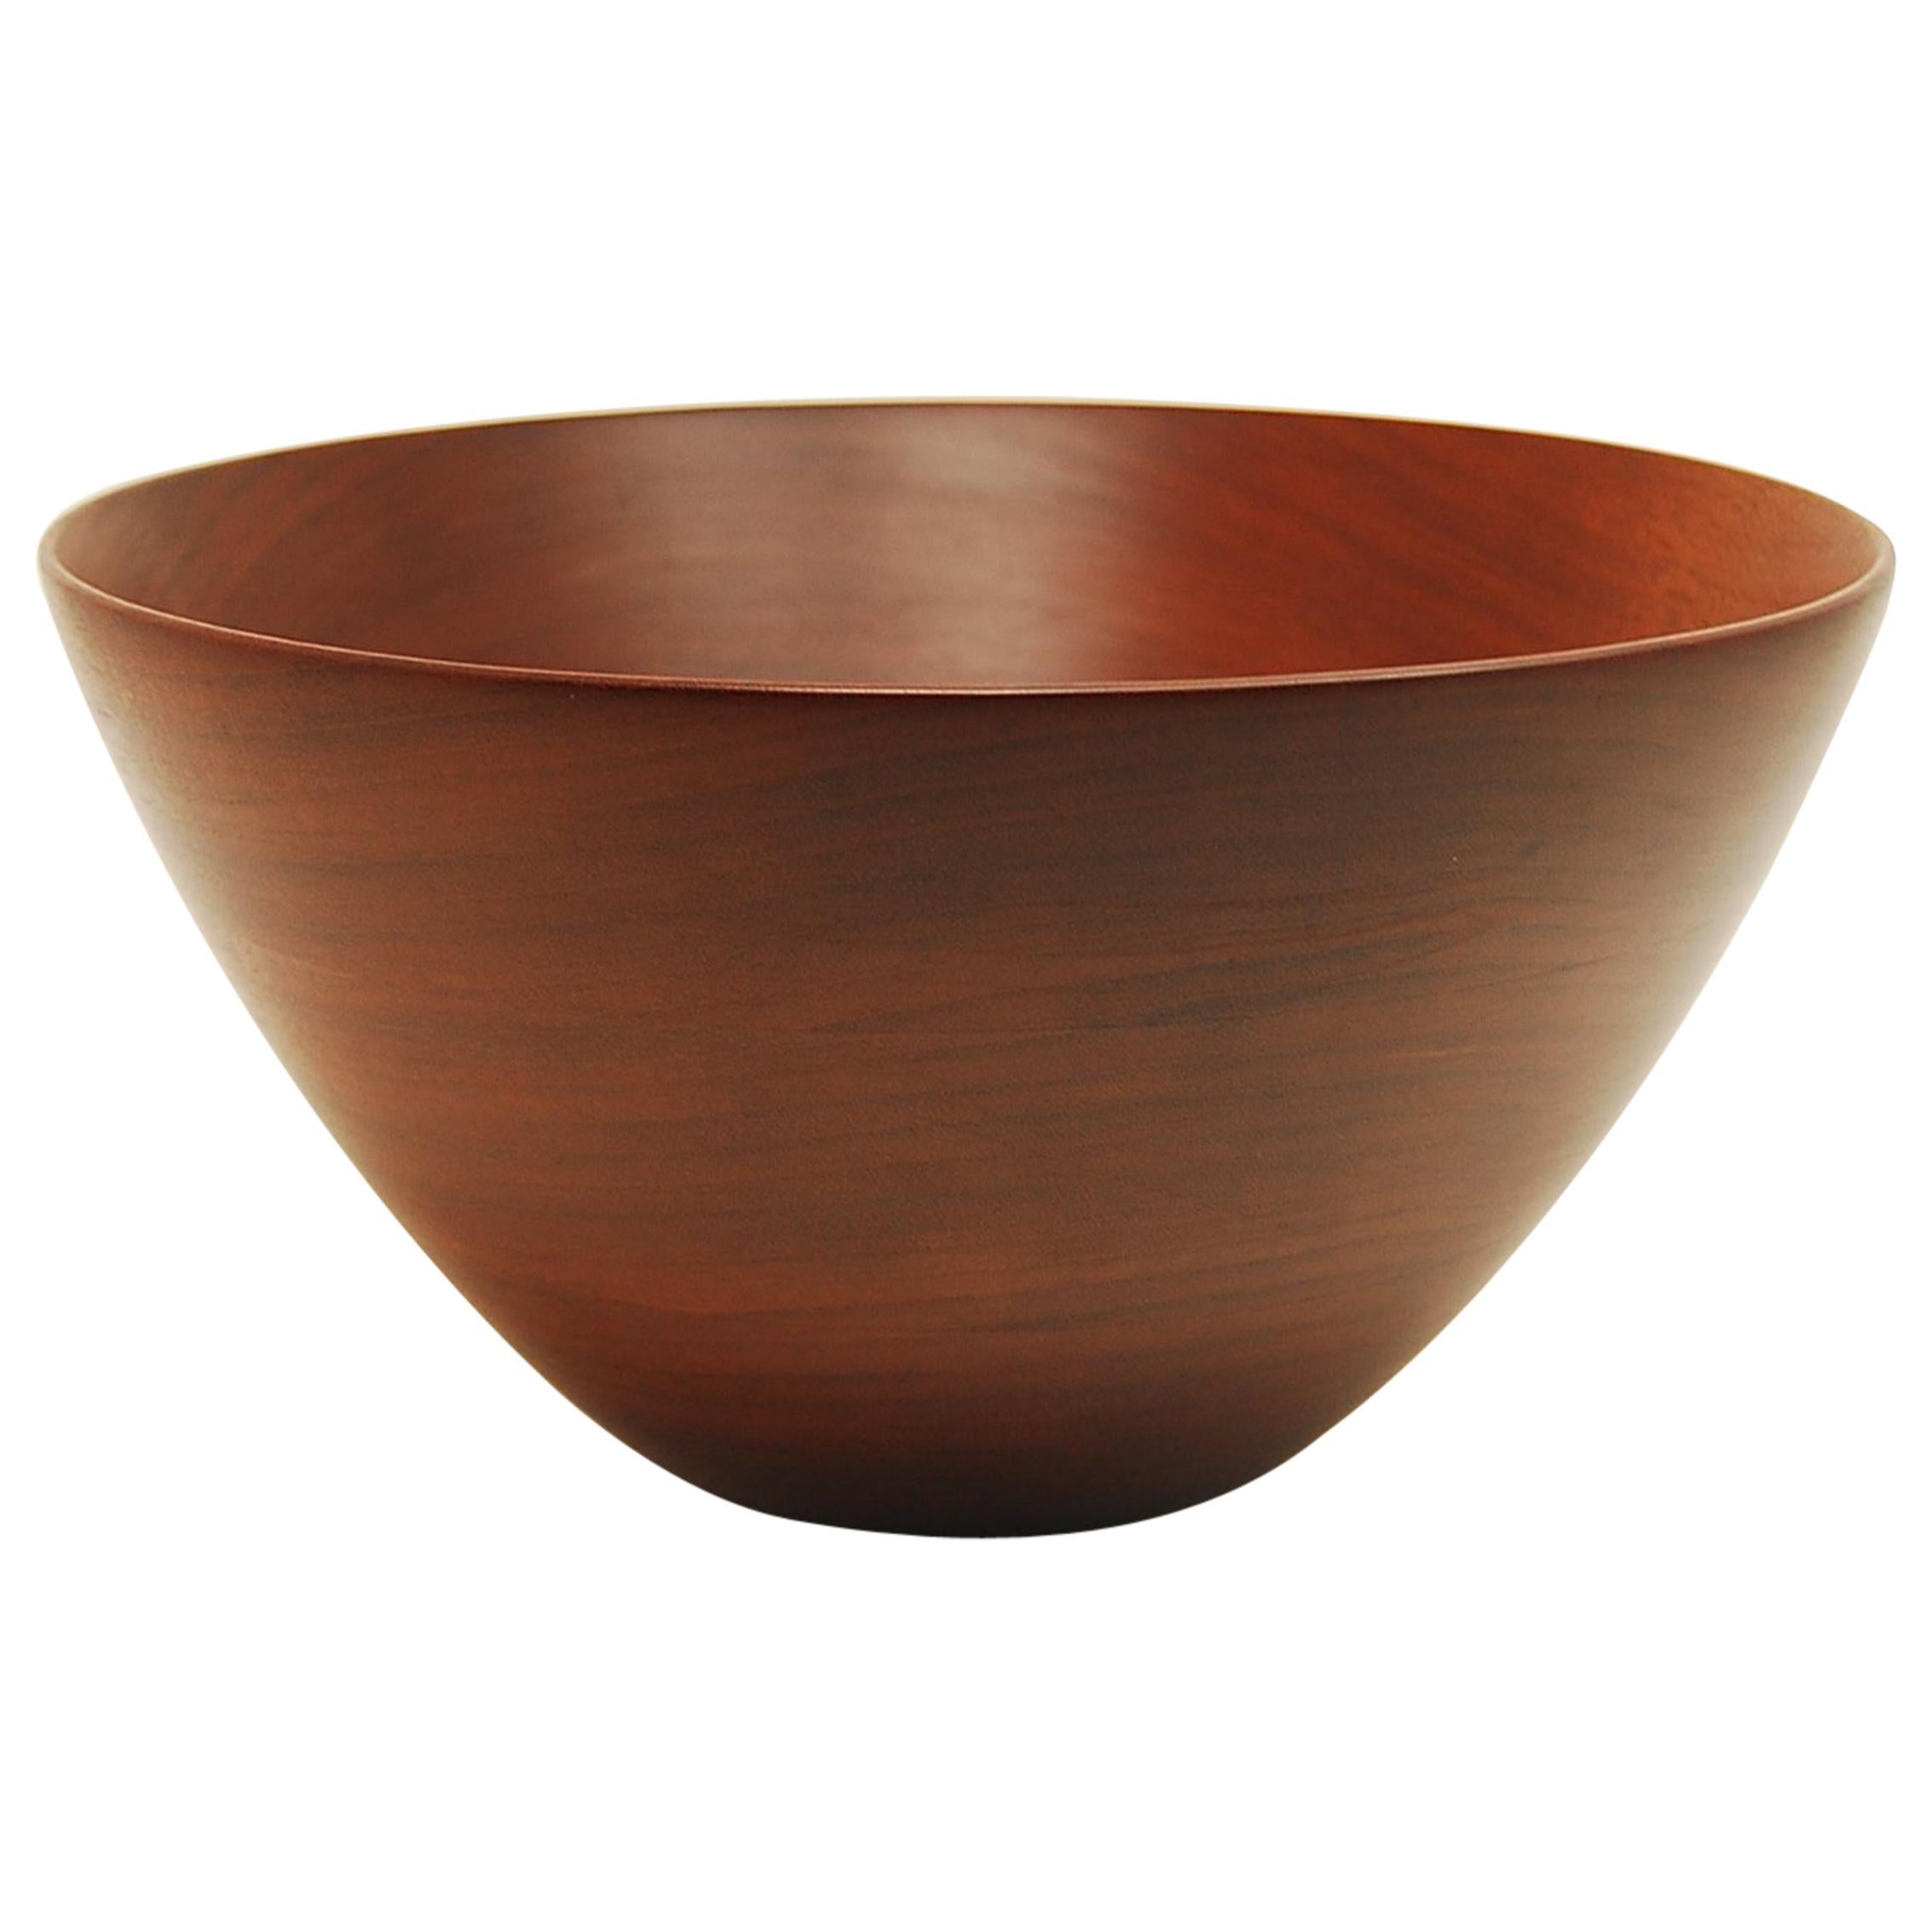 Large and Exquisit Cuban Mahogany Bowl by Frederik Lunning